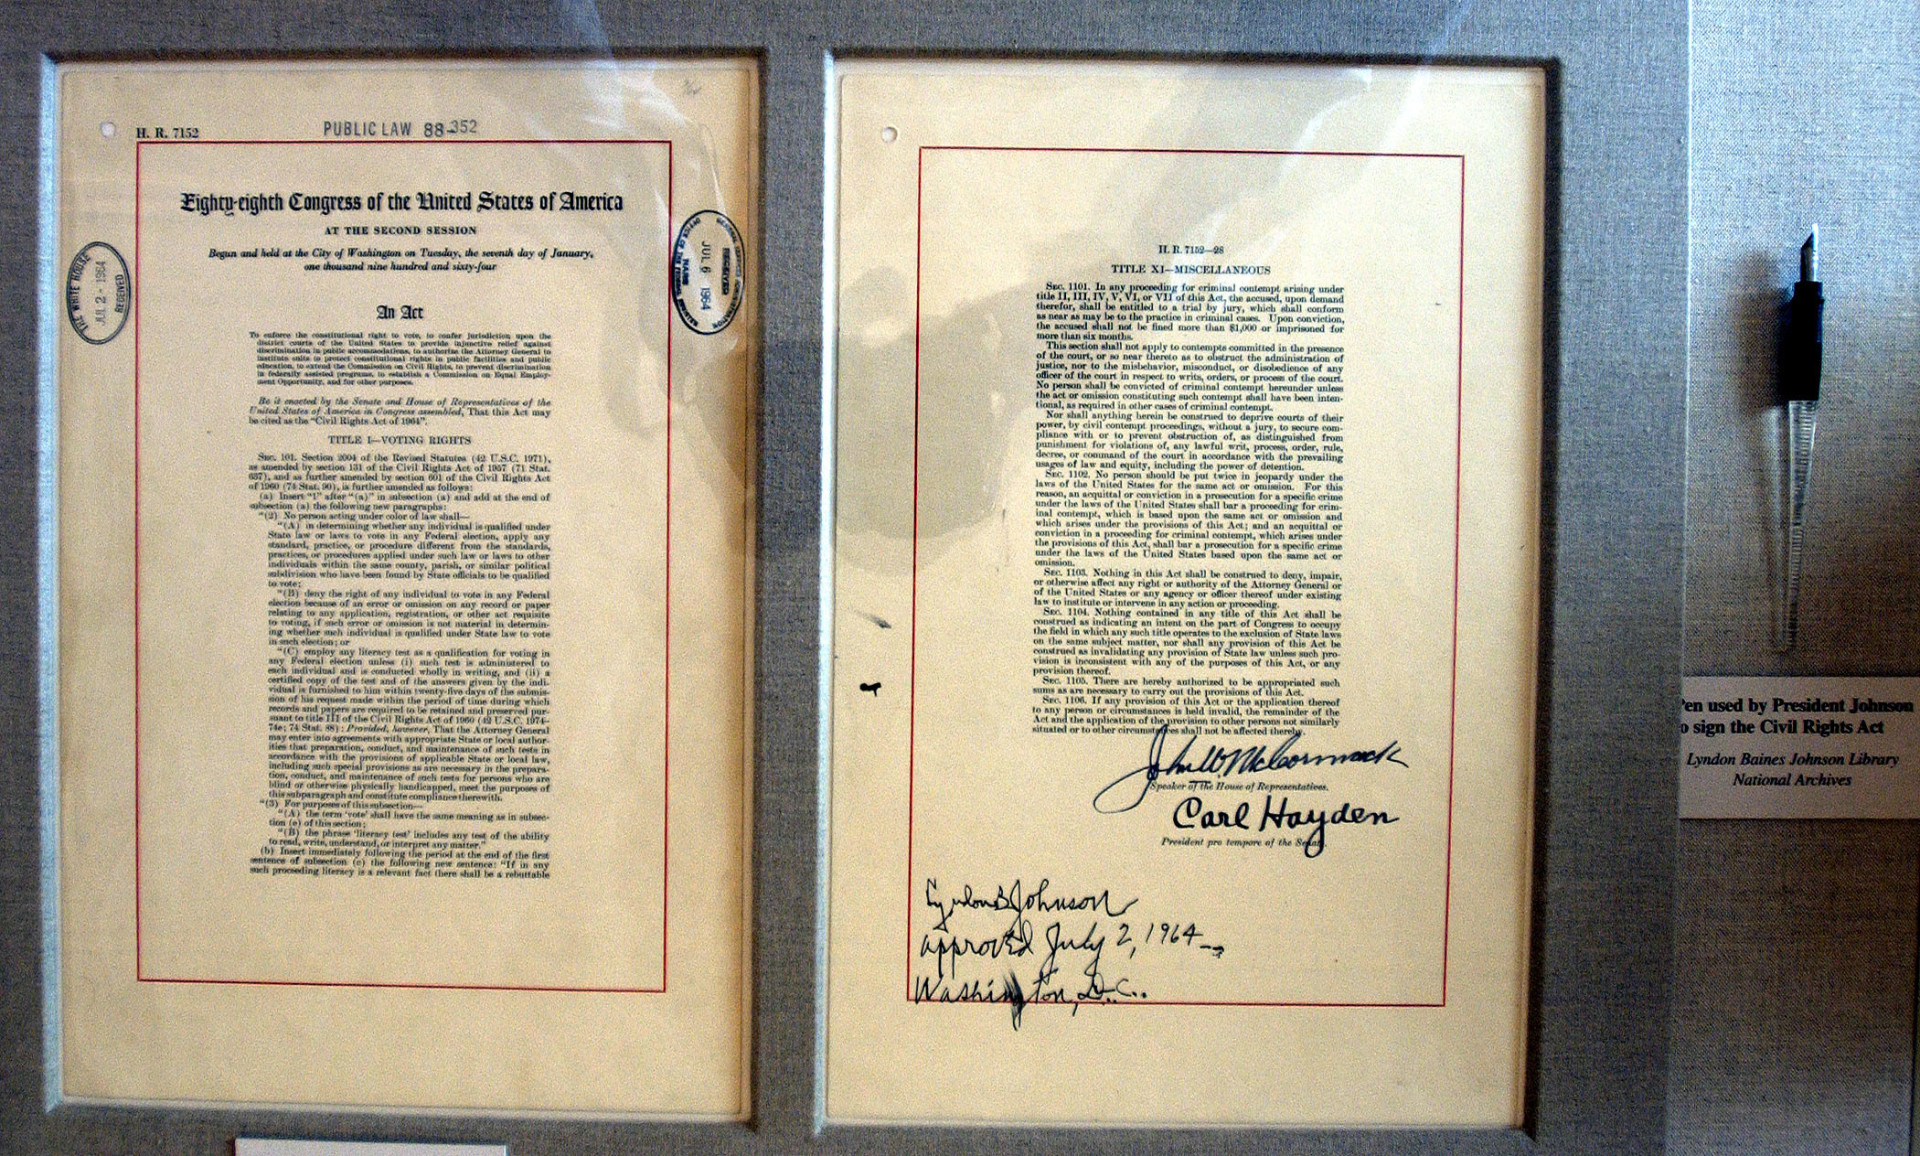 The actual Title VII of the Civil Rights Act of 1964 document and as well as the pen used to sign it is on display in the East Room of the White House.<p>You may also like:<a href="https://www.starsinsider.com/n/212871?utm_source=msn.com&utm_medium=display&utm_campaign=referral_description&utm_content=347864v15en-us"> Air-time legends: The longest-running TV series ever</a></p>